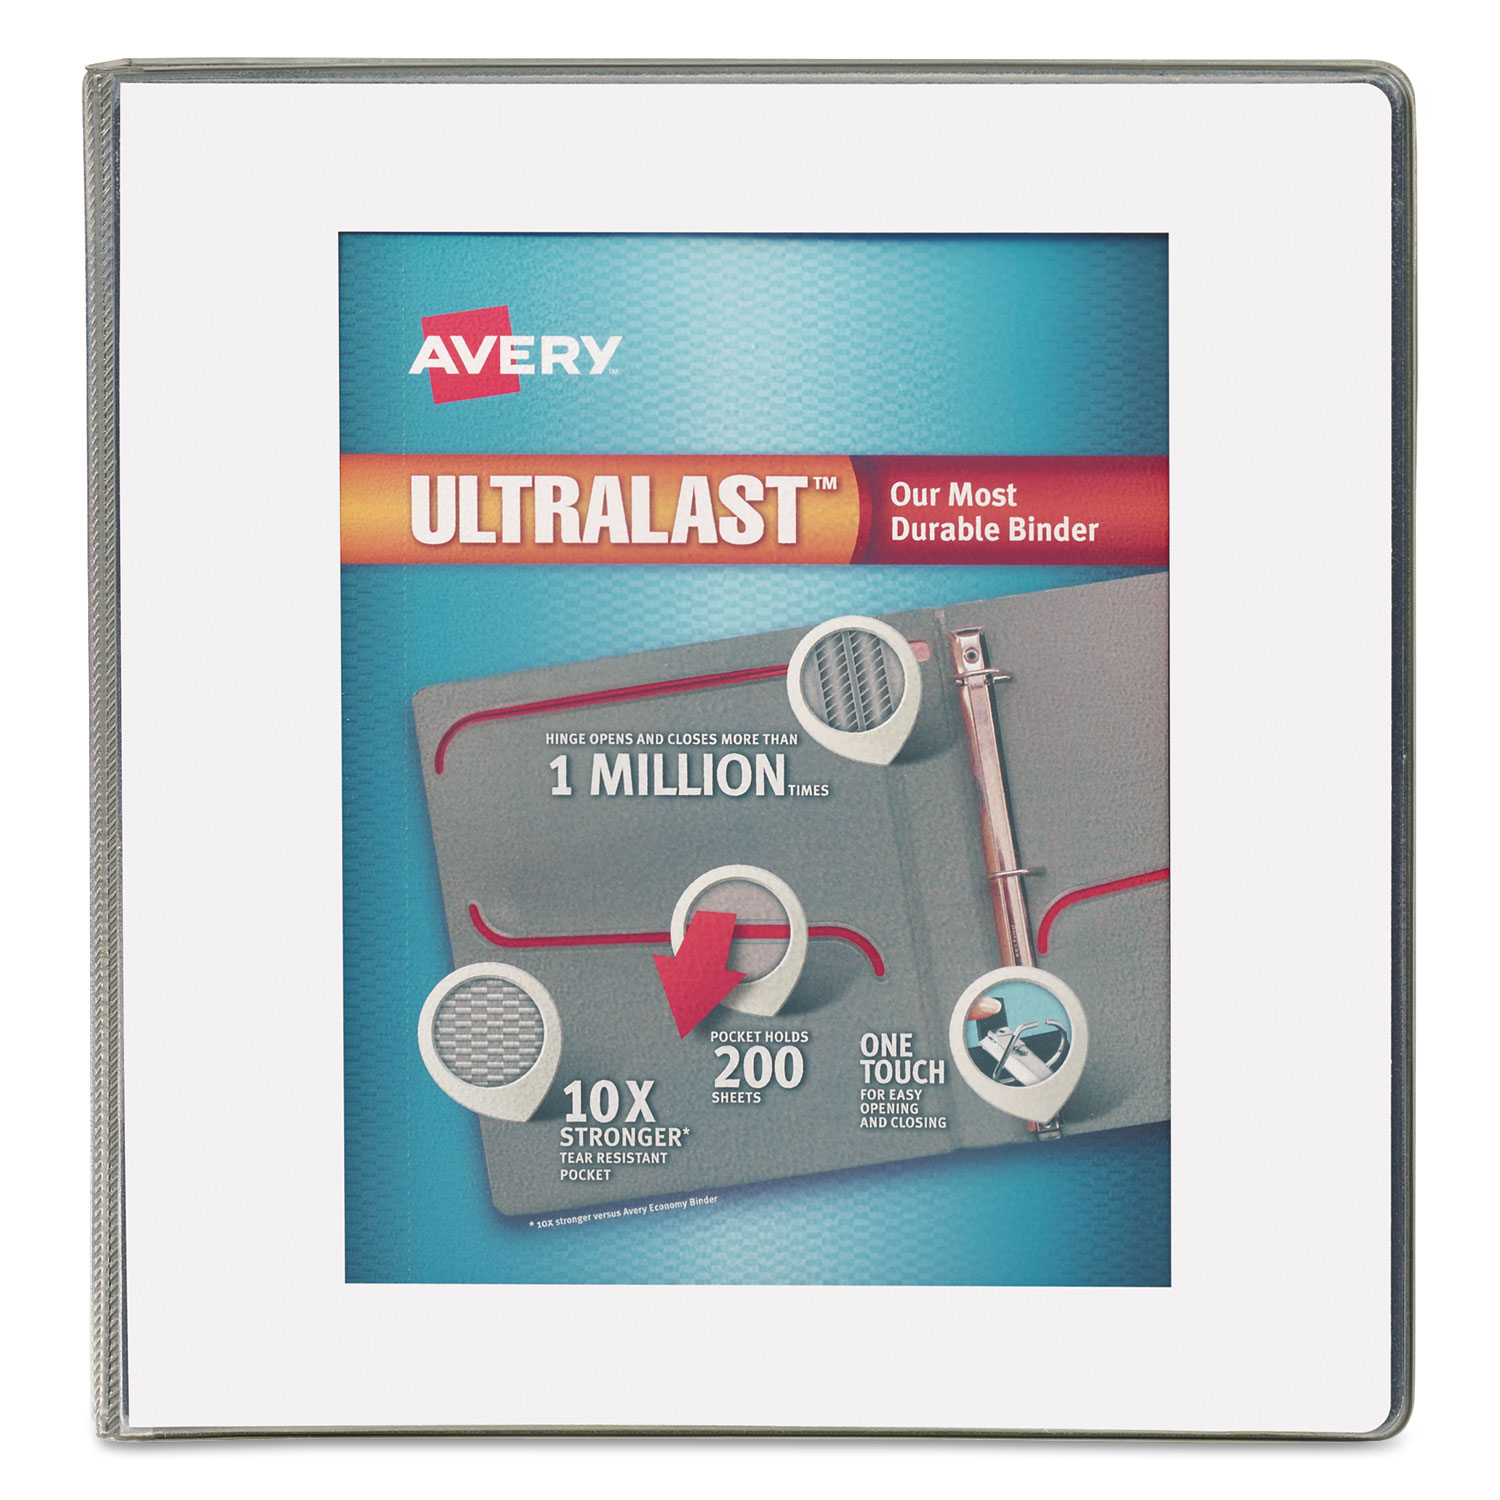  Avery 79744 UltraLast Heavy-Duty View Binder with One Touch Slant Rings, 3 Rings, 1 Capacity, 11 x 8.5, White (AVE79744) 